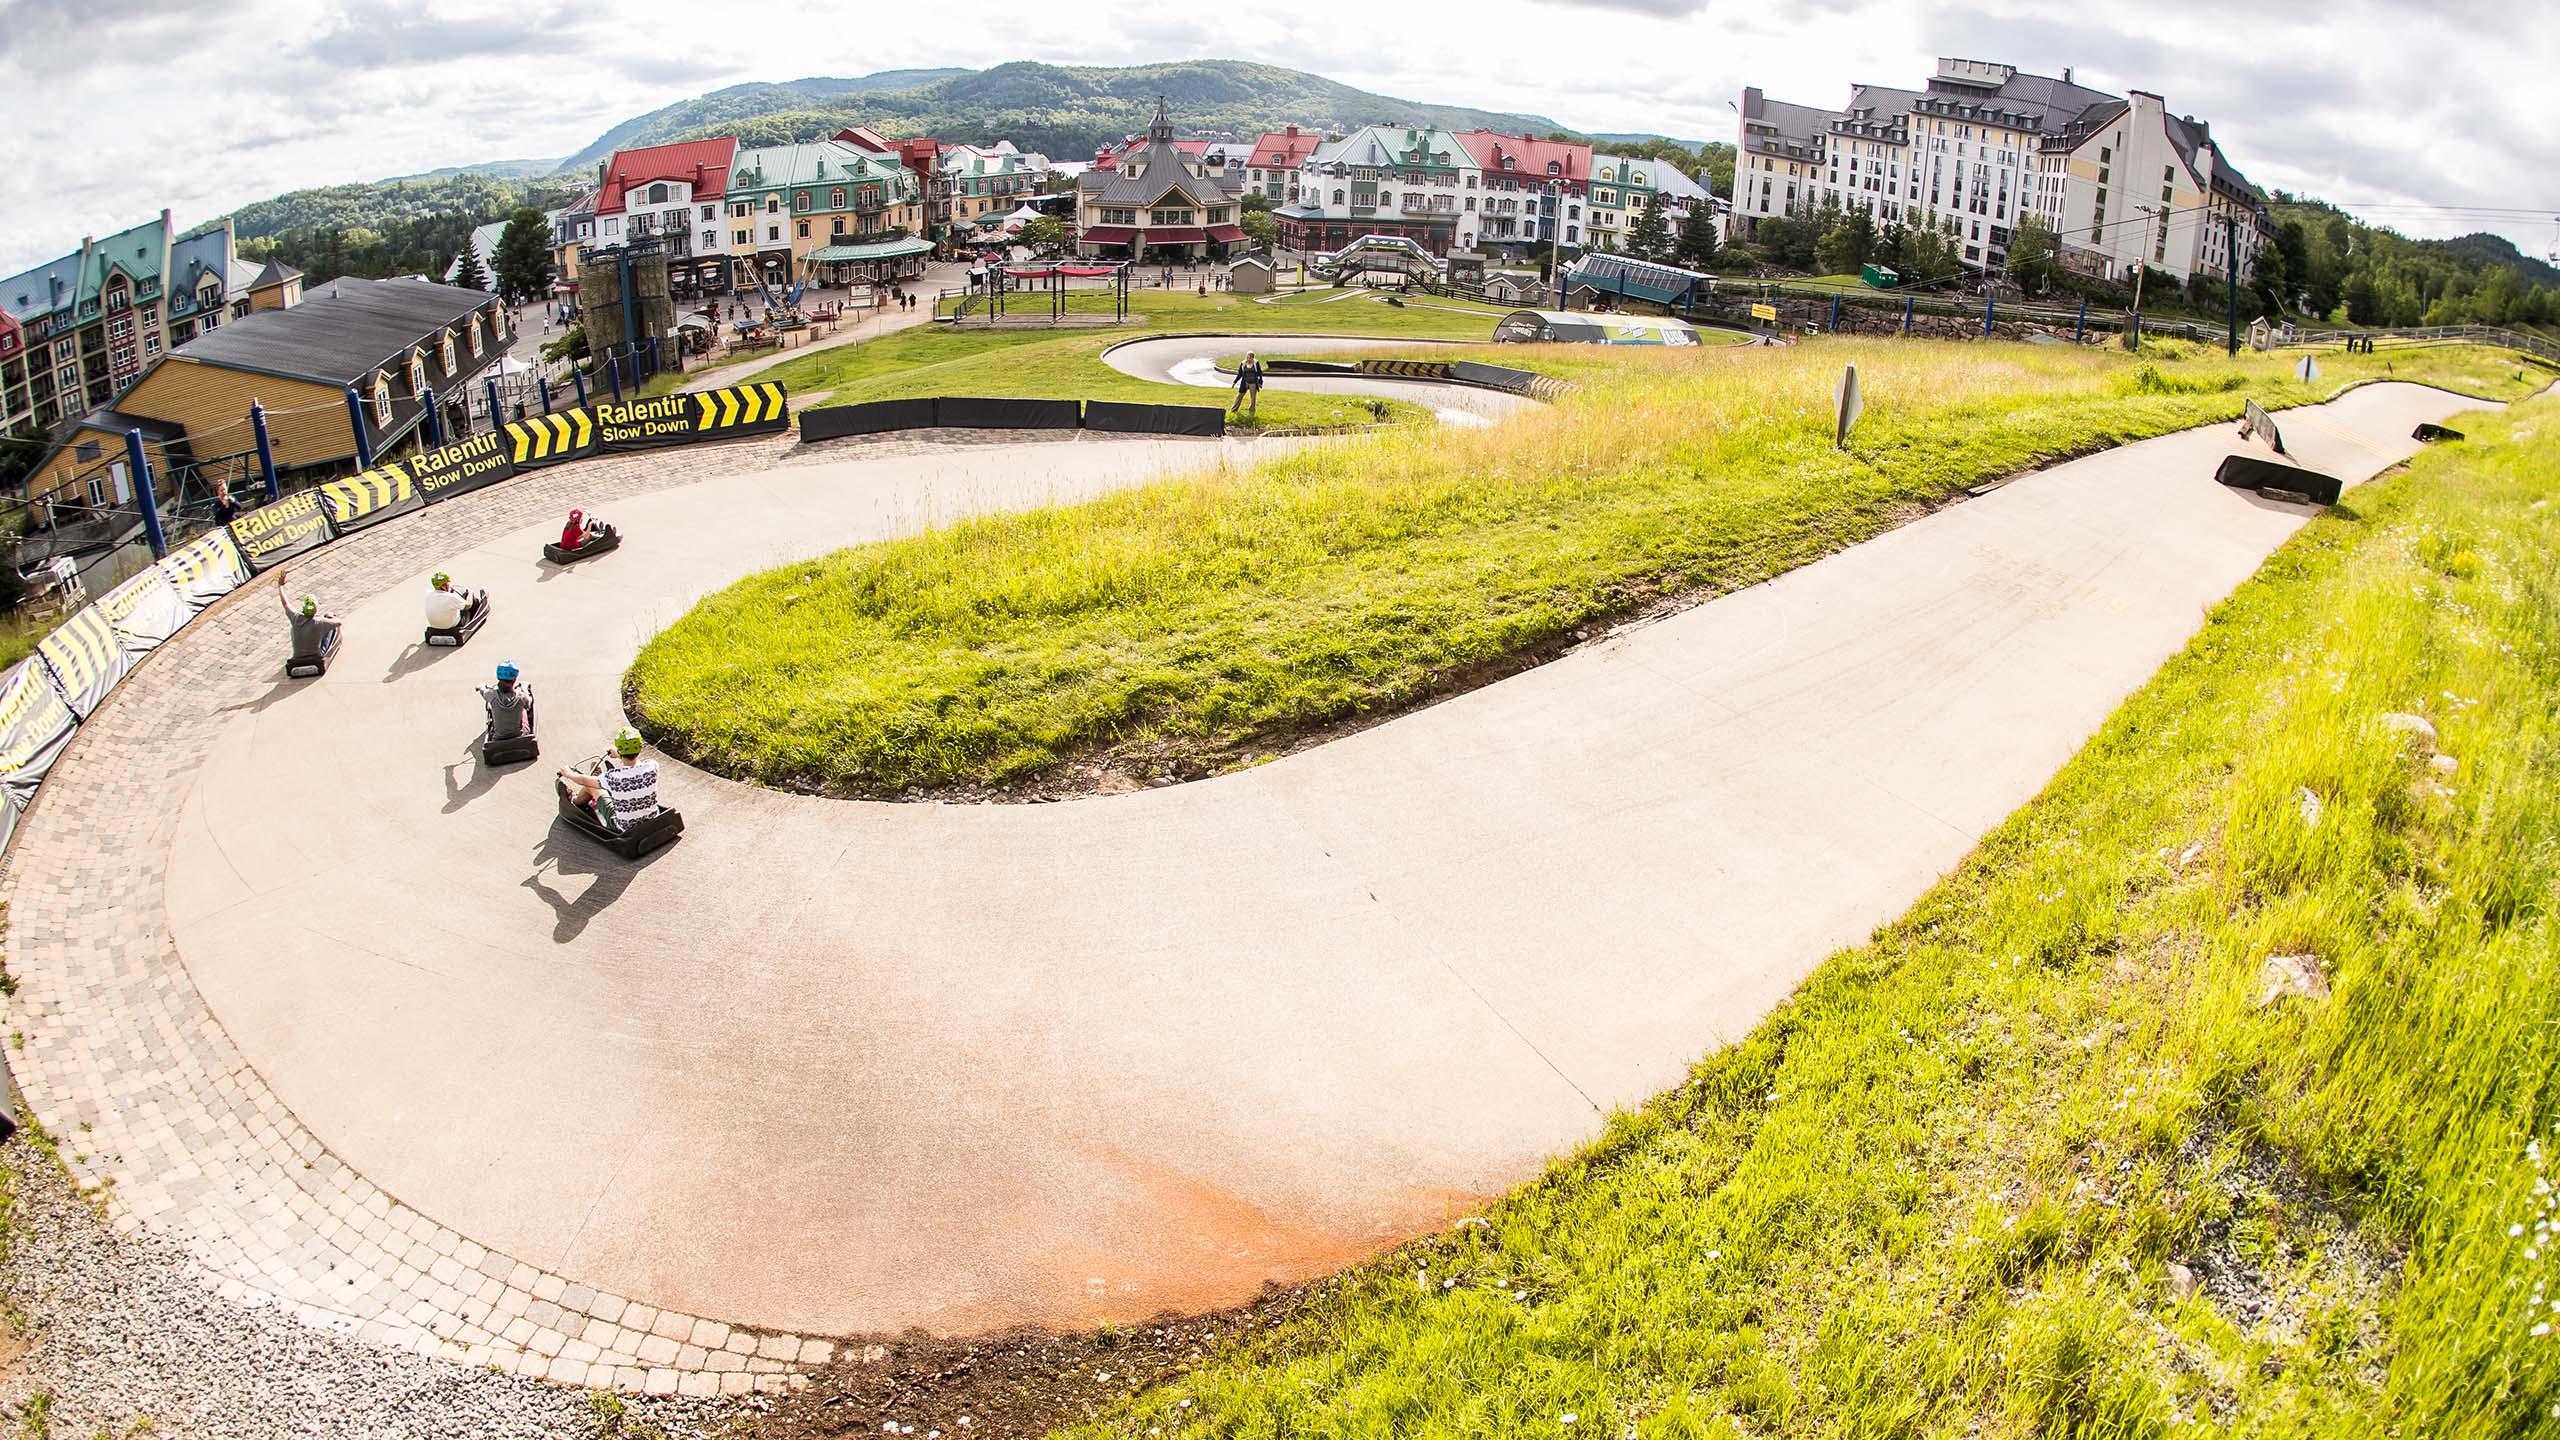 A group of customers ride around a large horseshoe corner at Skyline Luge Mont Tremblant.